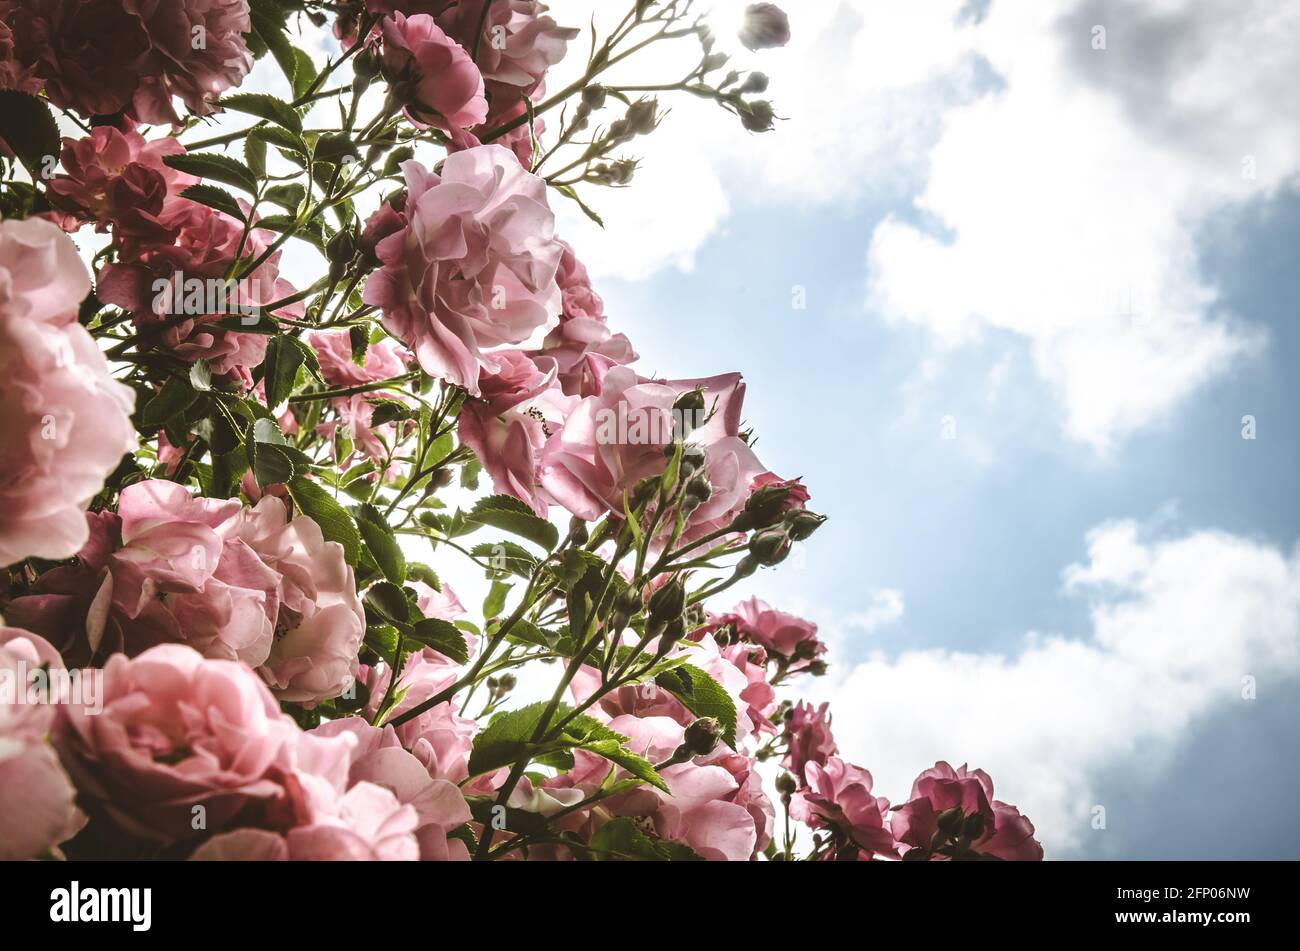 blossoming bush of pink roses dramatic effect and blue sky with clouds Stock Photo